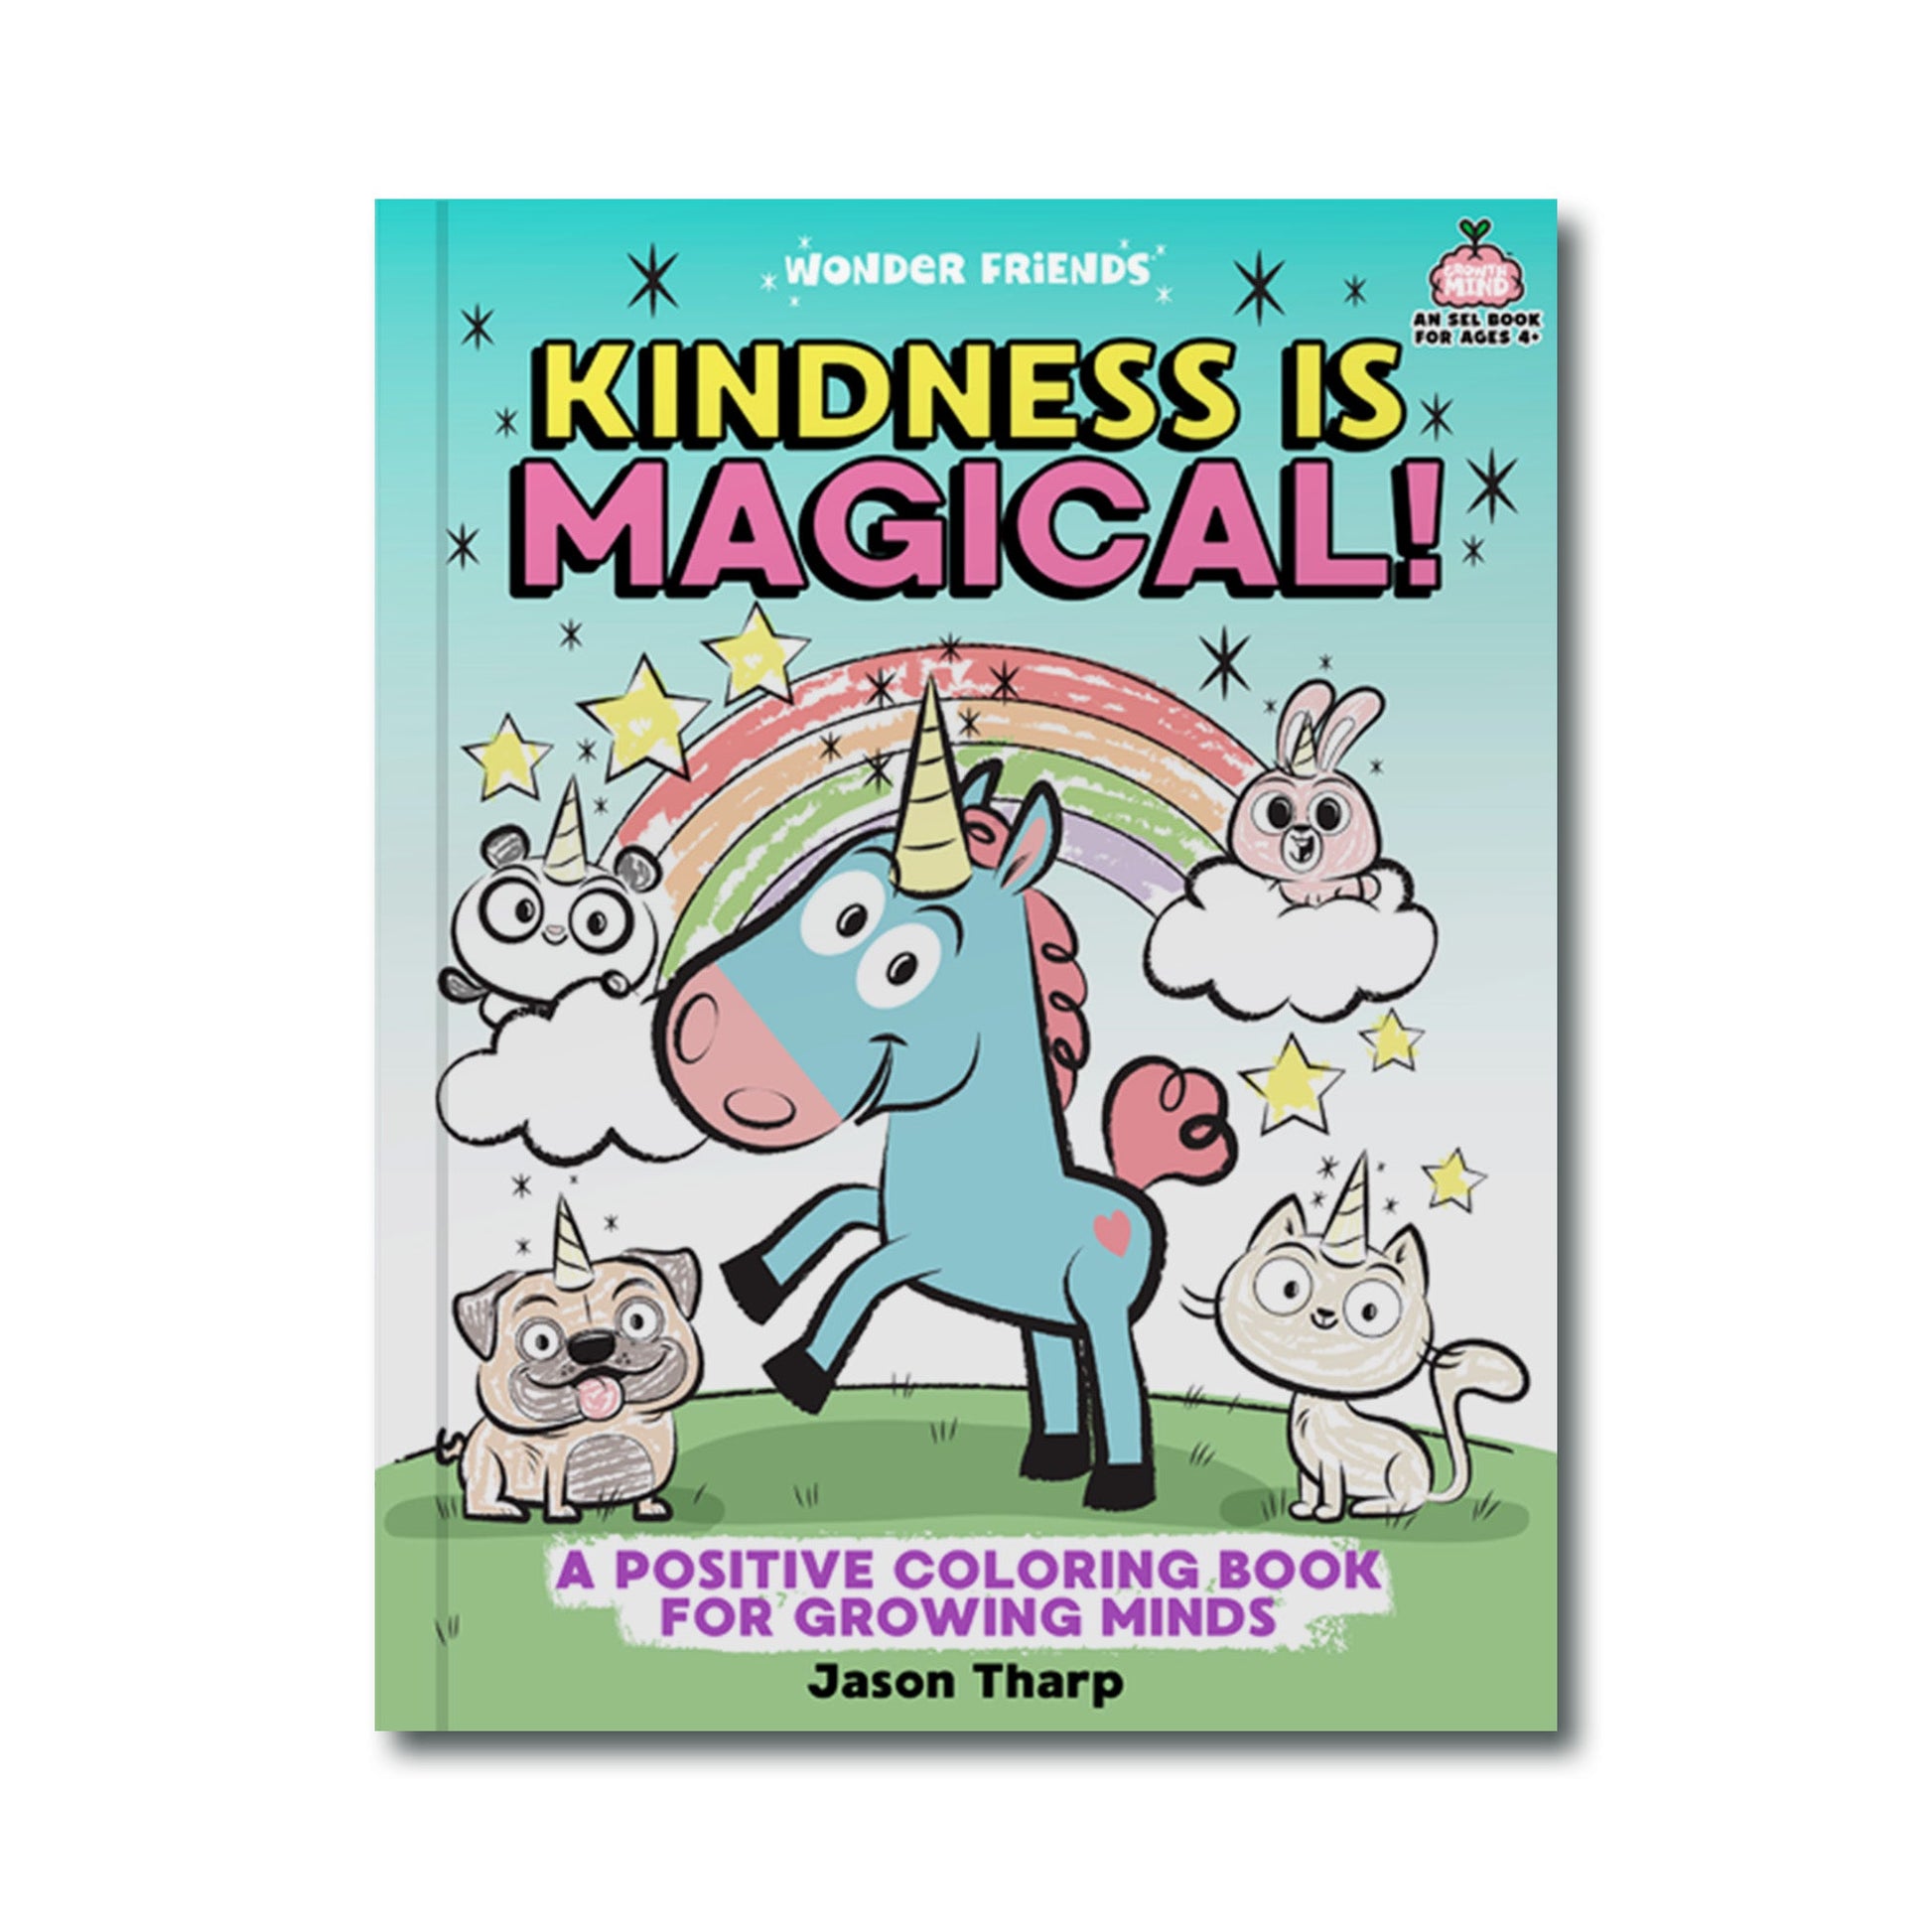 Wonderville Studios Book Kindness Is Magical! An SEL Coloring Book